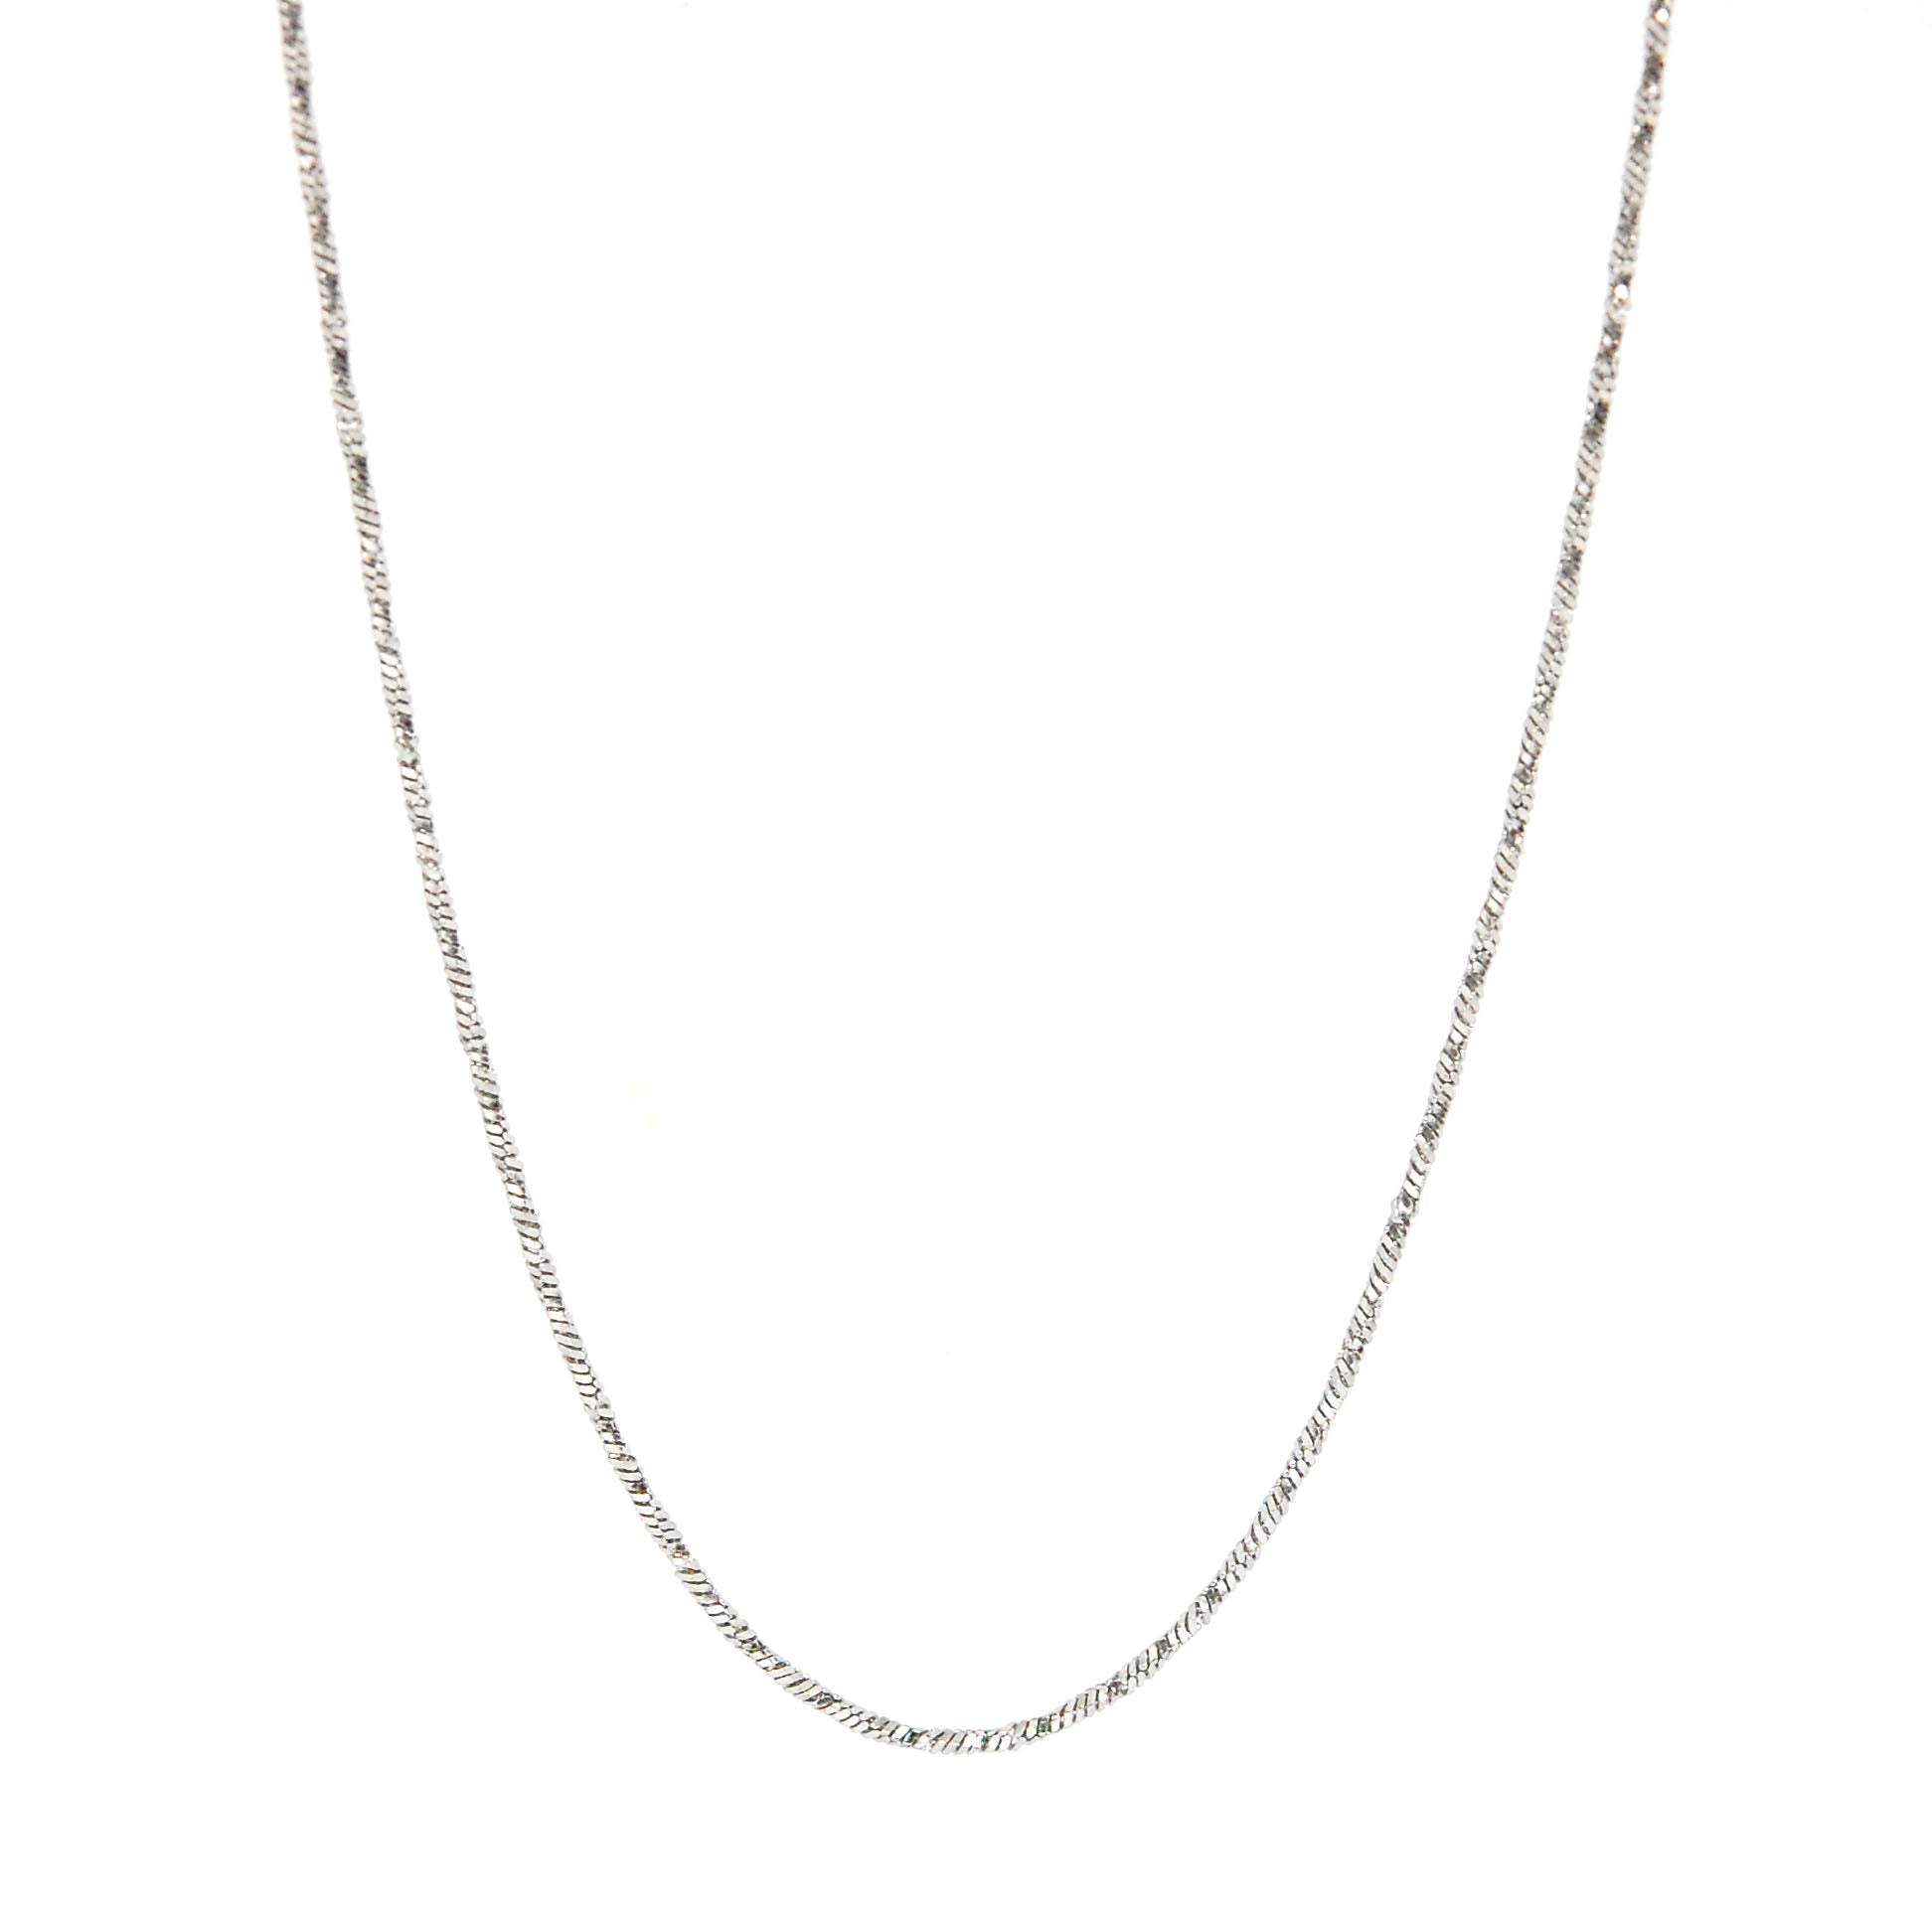 ESCH 7789: 19" S/S Twisted Square Snake Chain